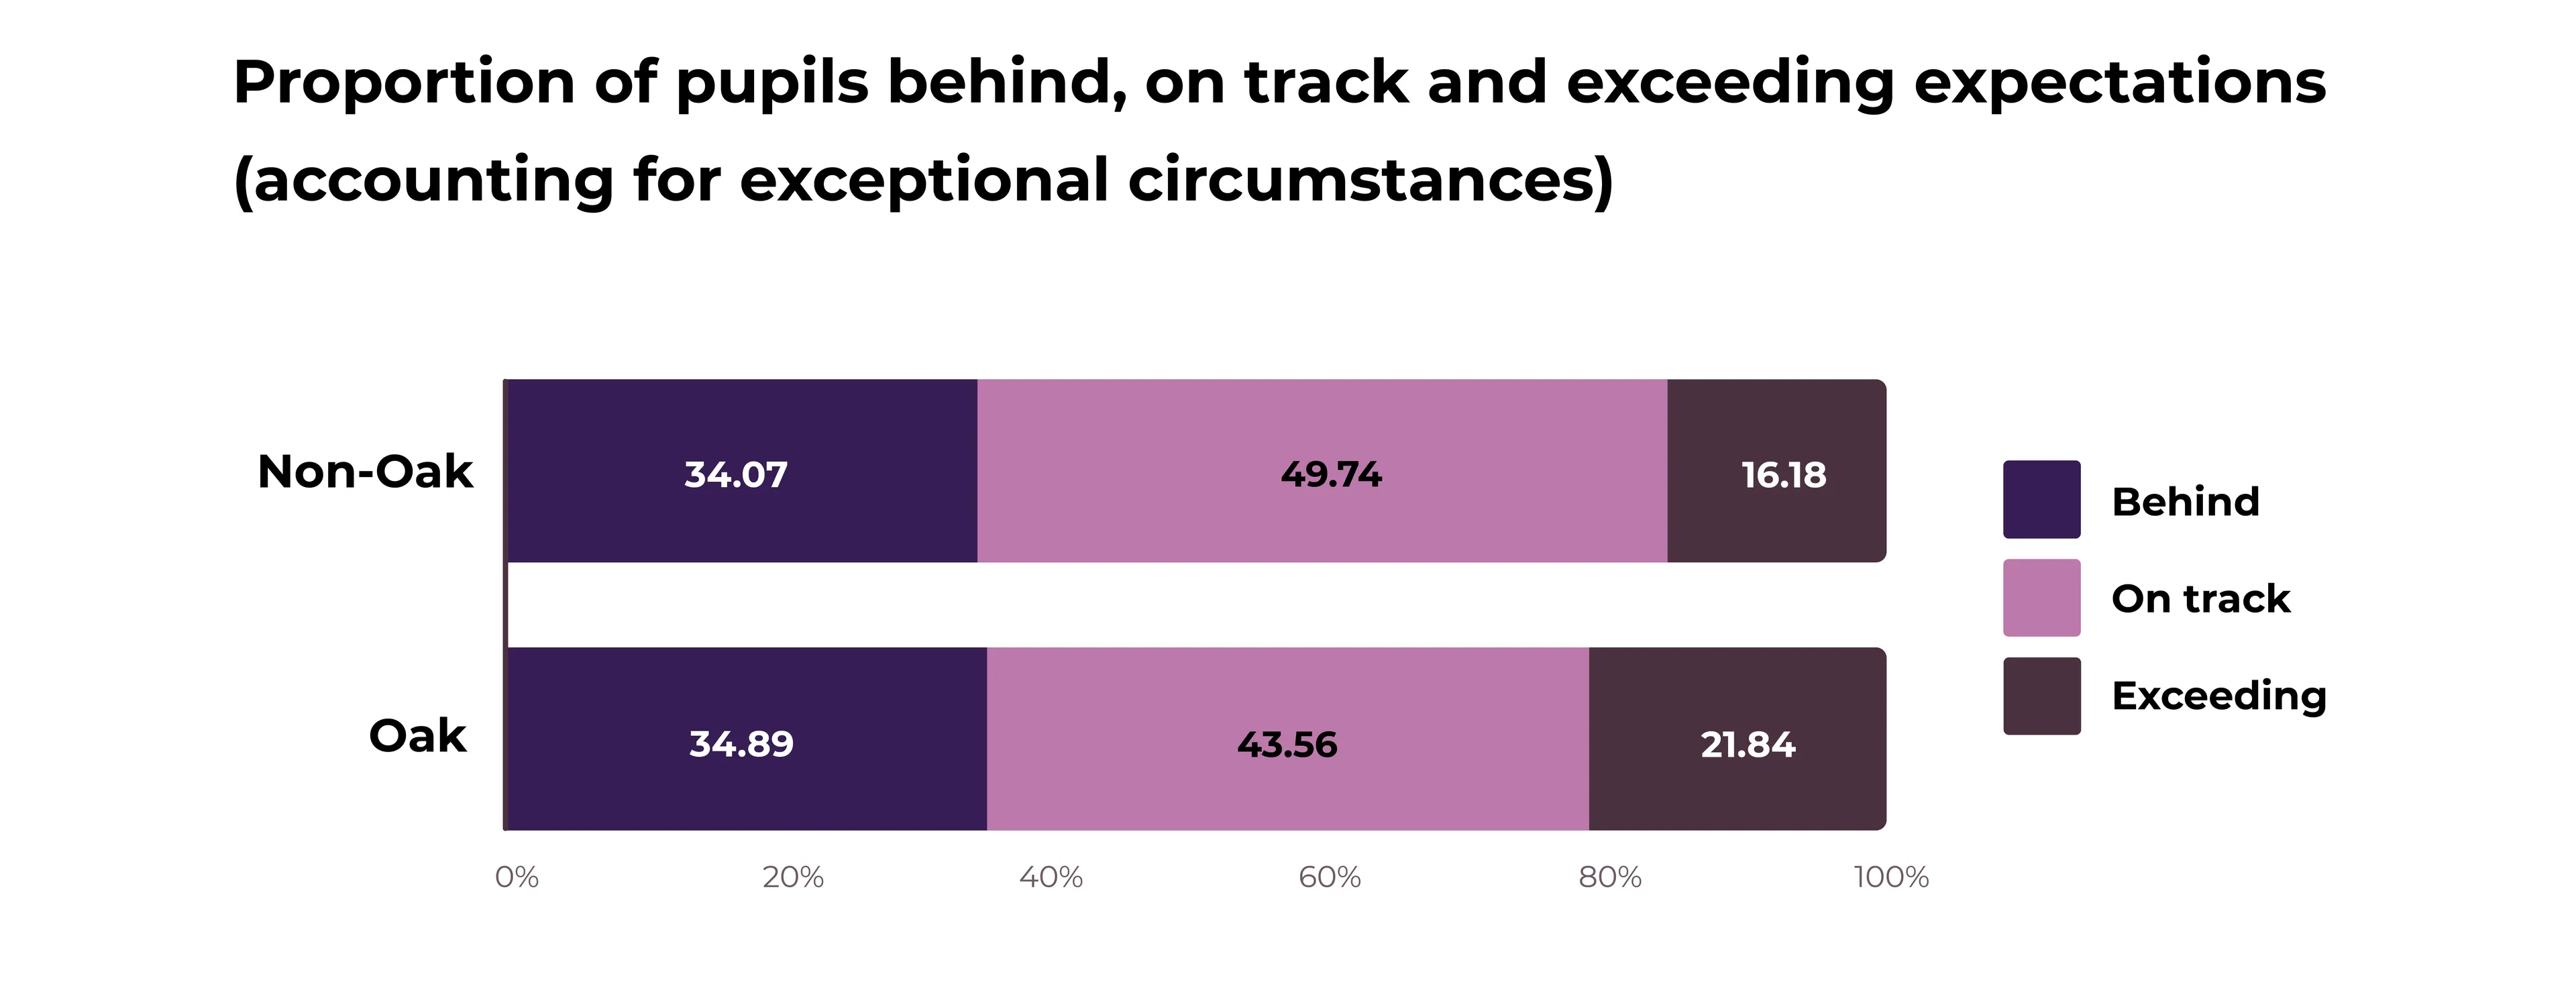 Bar graph showing proportion of pupils that are behind, on track and exceeding expectations (accounting for exceptional circumstances) split by Oak users and non-Oak users. 